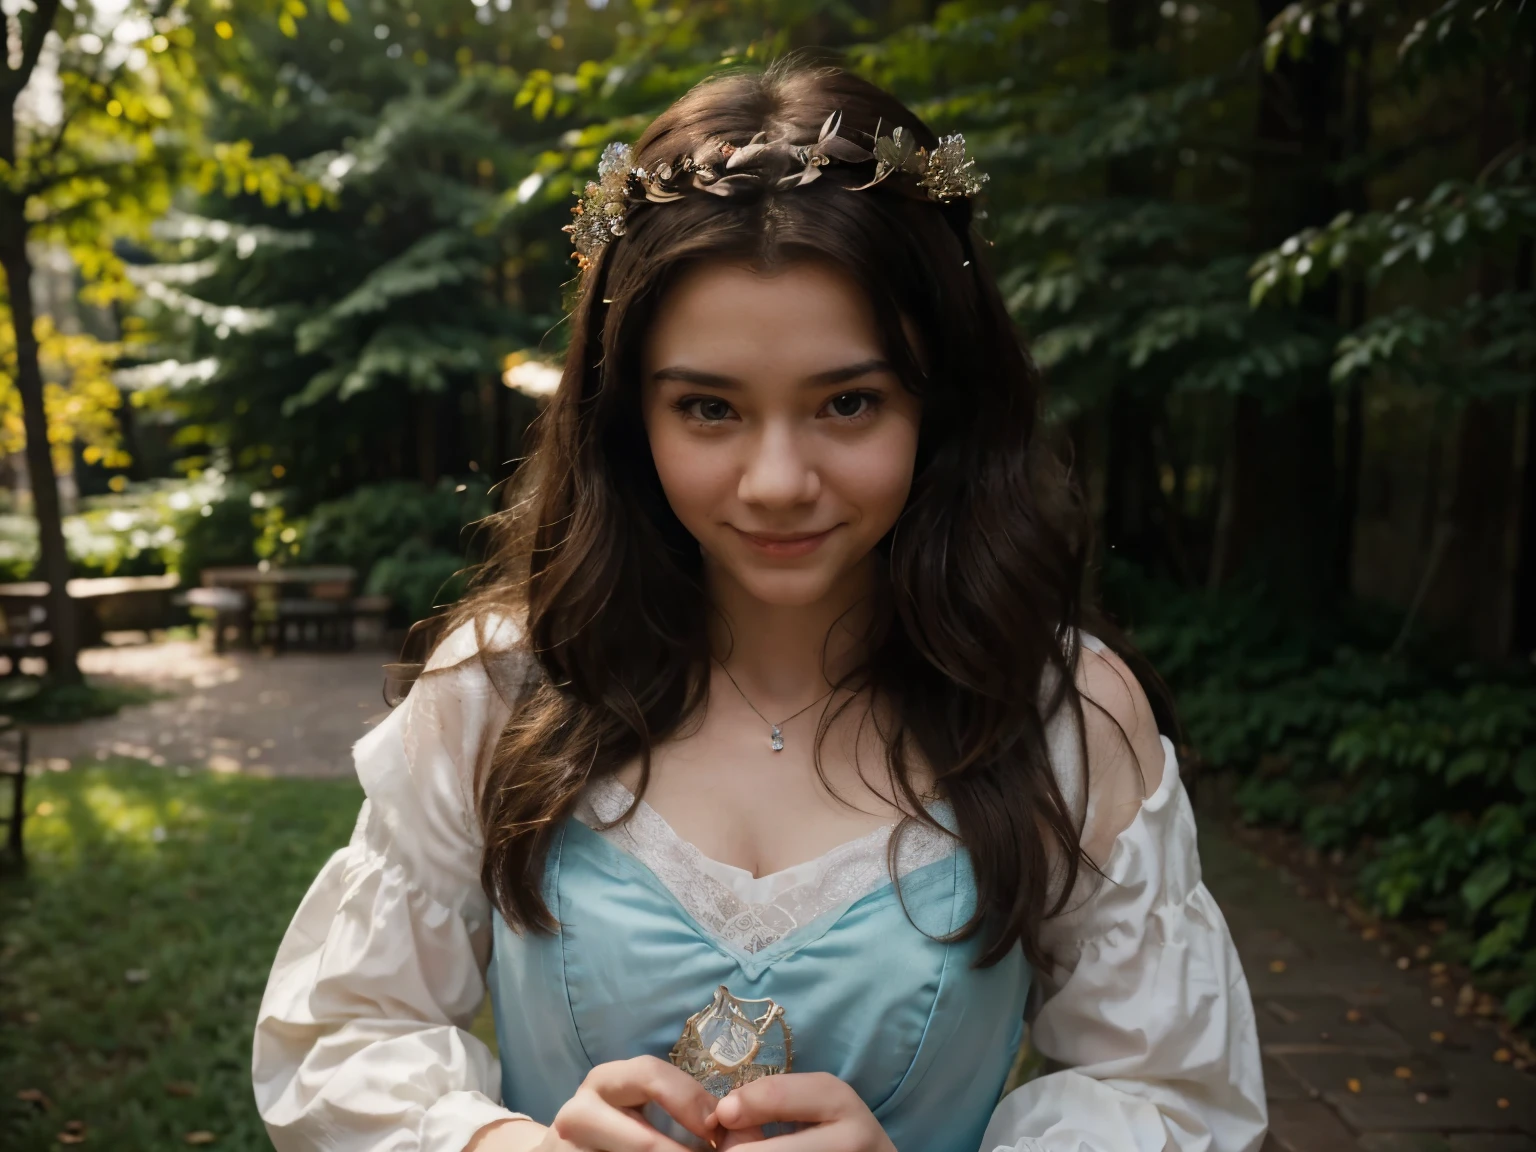 (Brett Cooper smiling),(Disney's princess cosplay),(beautiful,very detailed),(cinematic),(photorealistic),vibrant colors,soft lighting,dreamlike atmosphere,fairytale setting,magical snowflakes,delicate lace dress,enchanted forest,storybook quality,expressive eyes,rosy cheeks,elegant pose,graceful movements,ethereal beauty,evoke a sense of wonder,attention to small details,dynamic composition,emotionally captivating,pure and innocent demeanor,fantastical elements,evokes nostalgia and enchantment